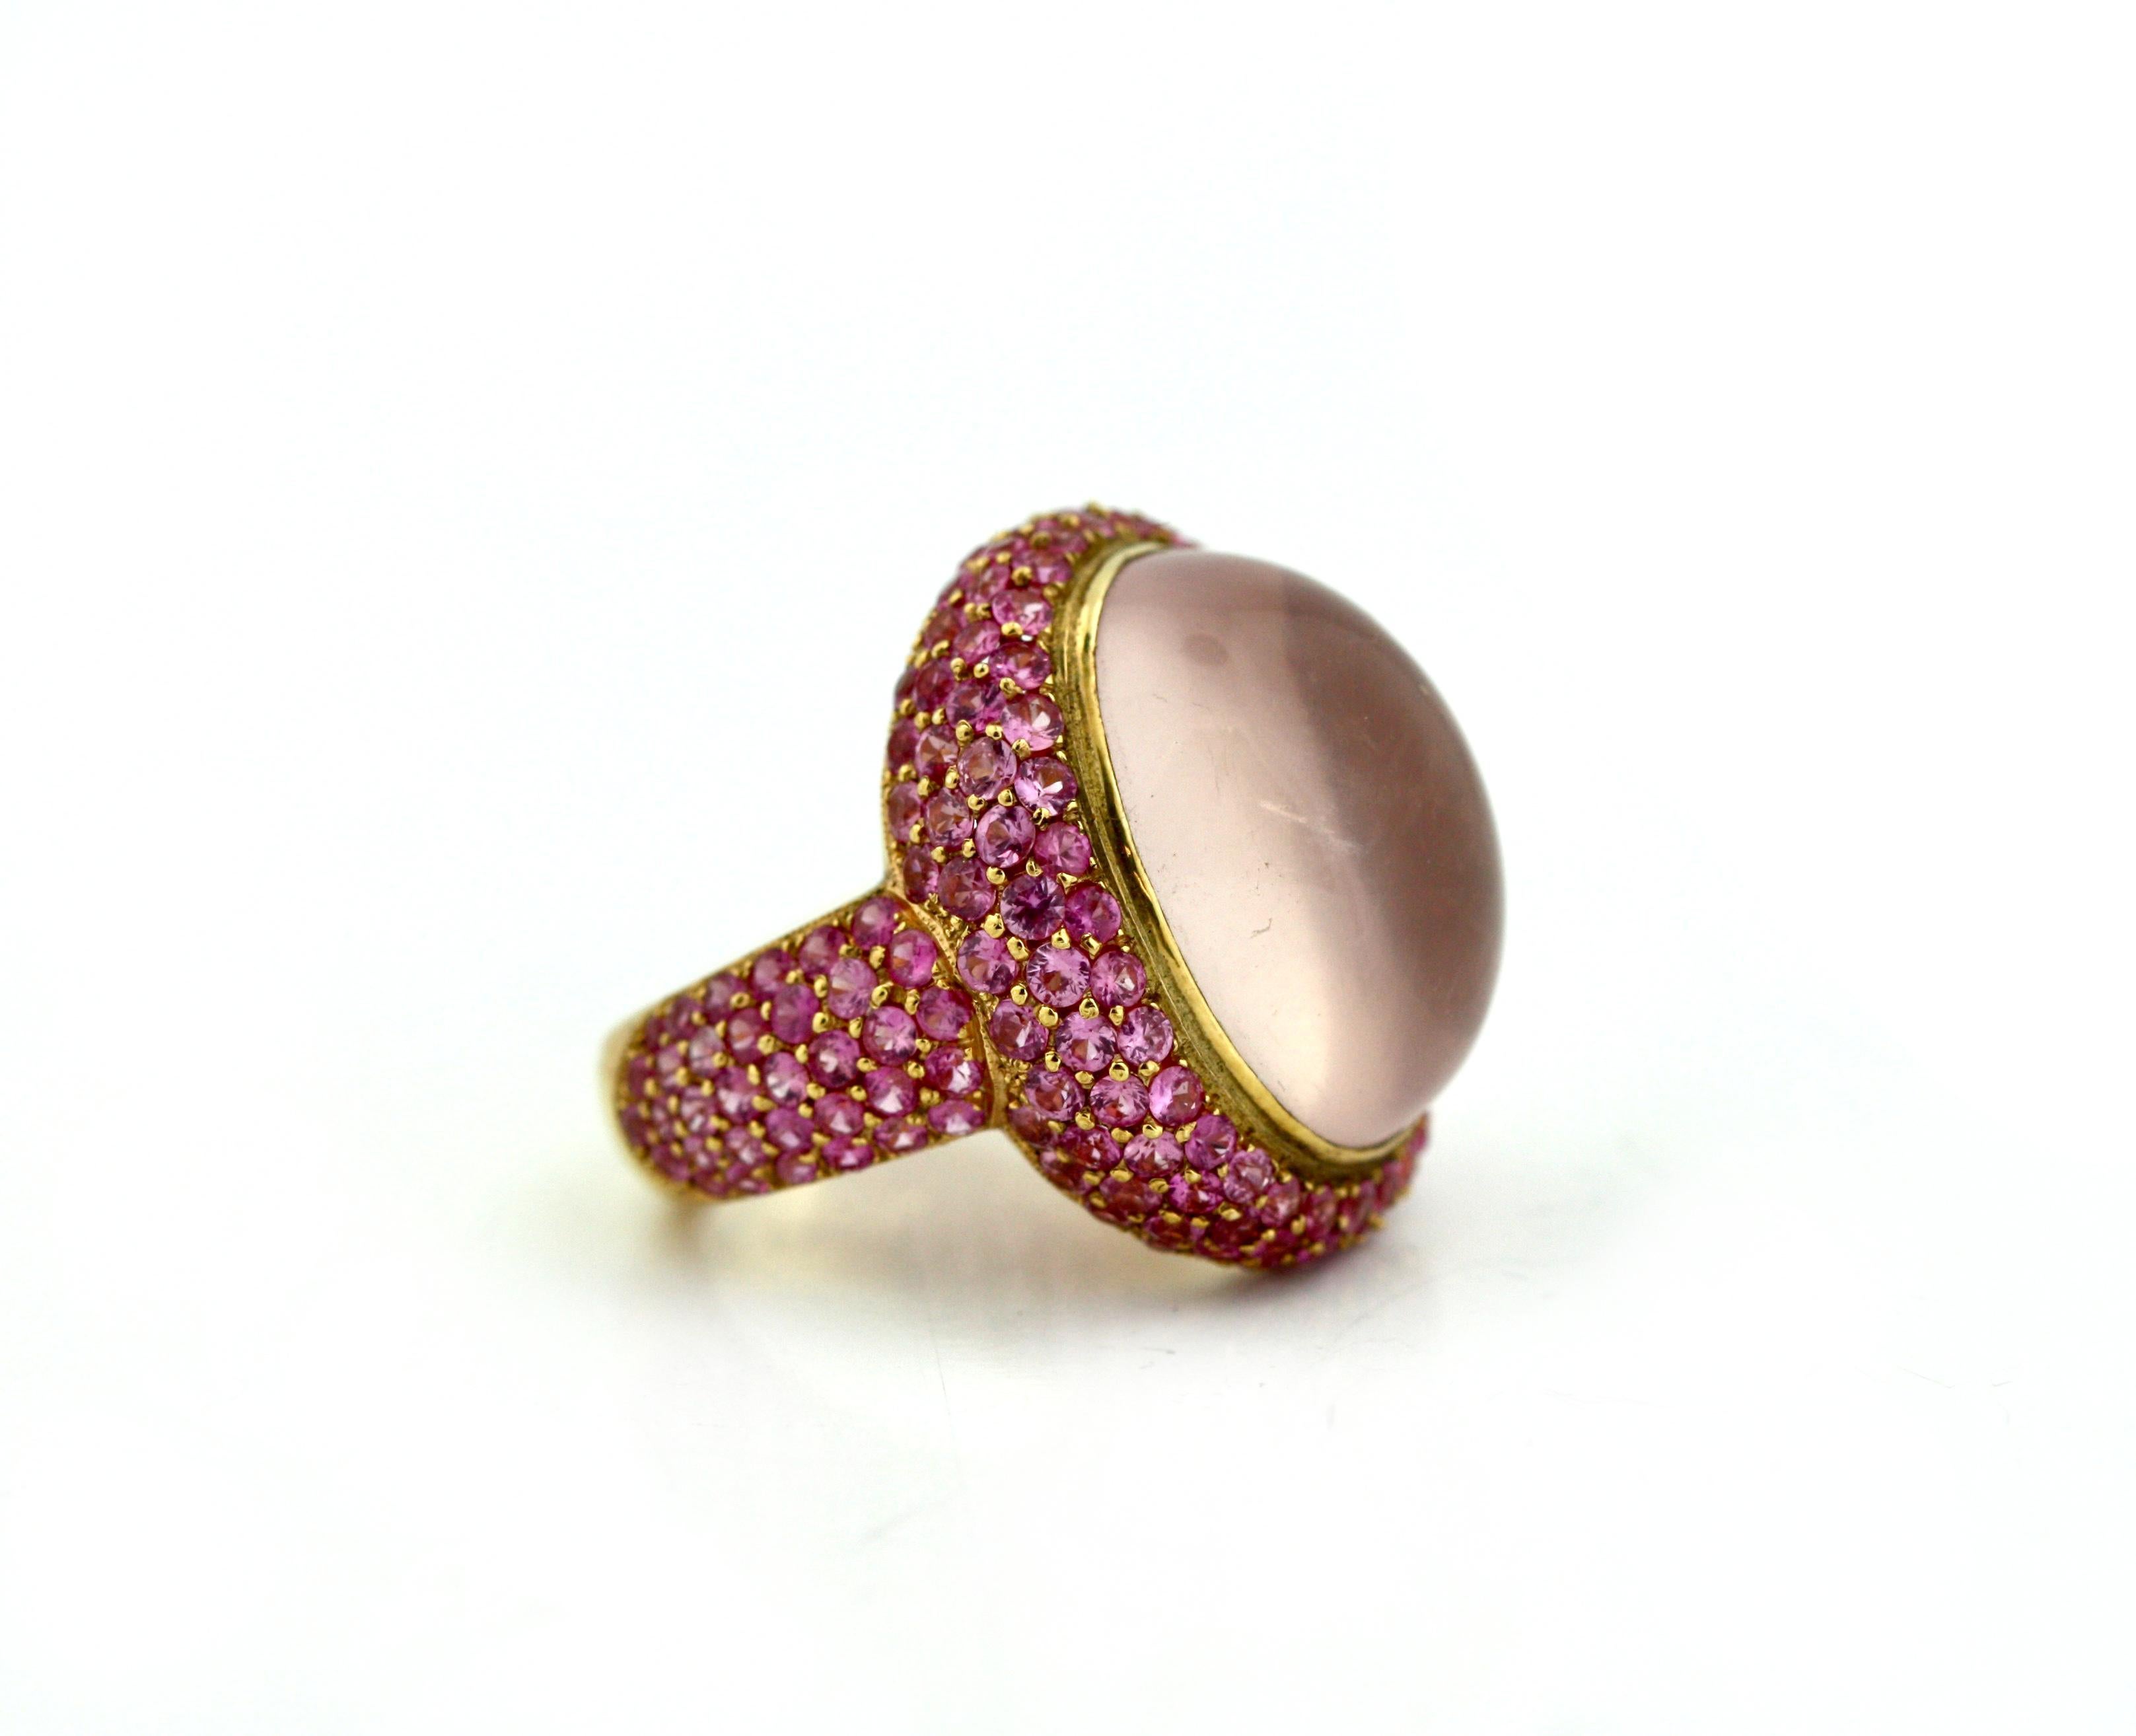 18KT GOLD, PINK SAPPHIRE AND ROSE QUARTZ RING
Rose Quarts approx. 21.28 carats, Pink Sapphires approx. 5.32 carats
size 6